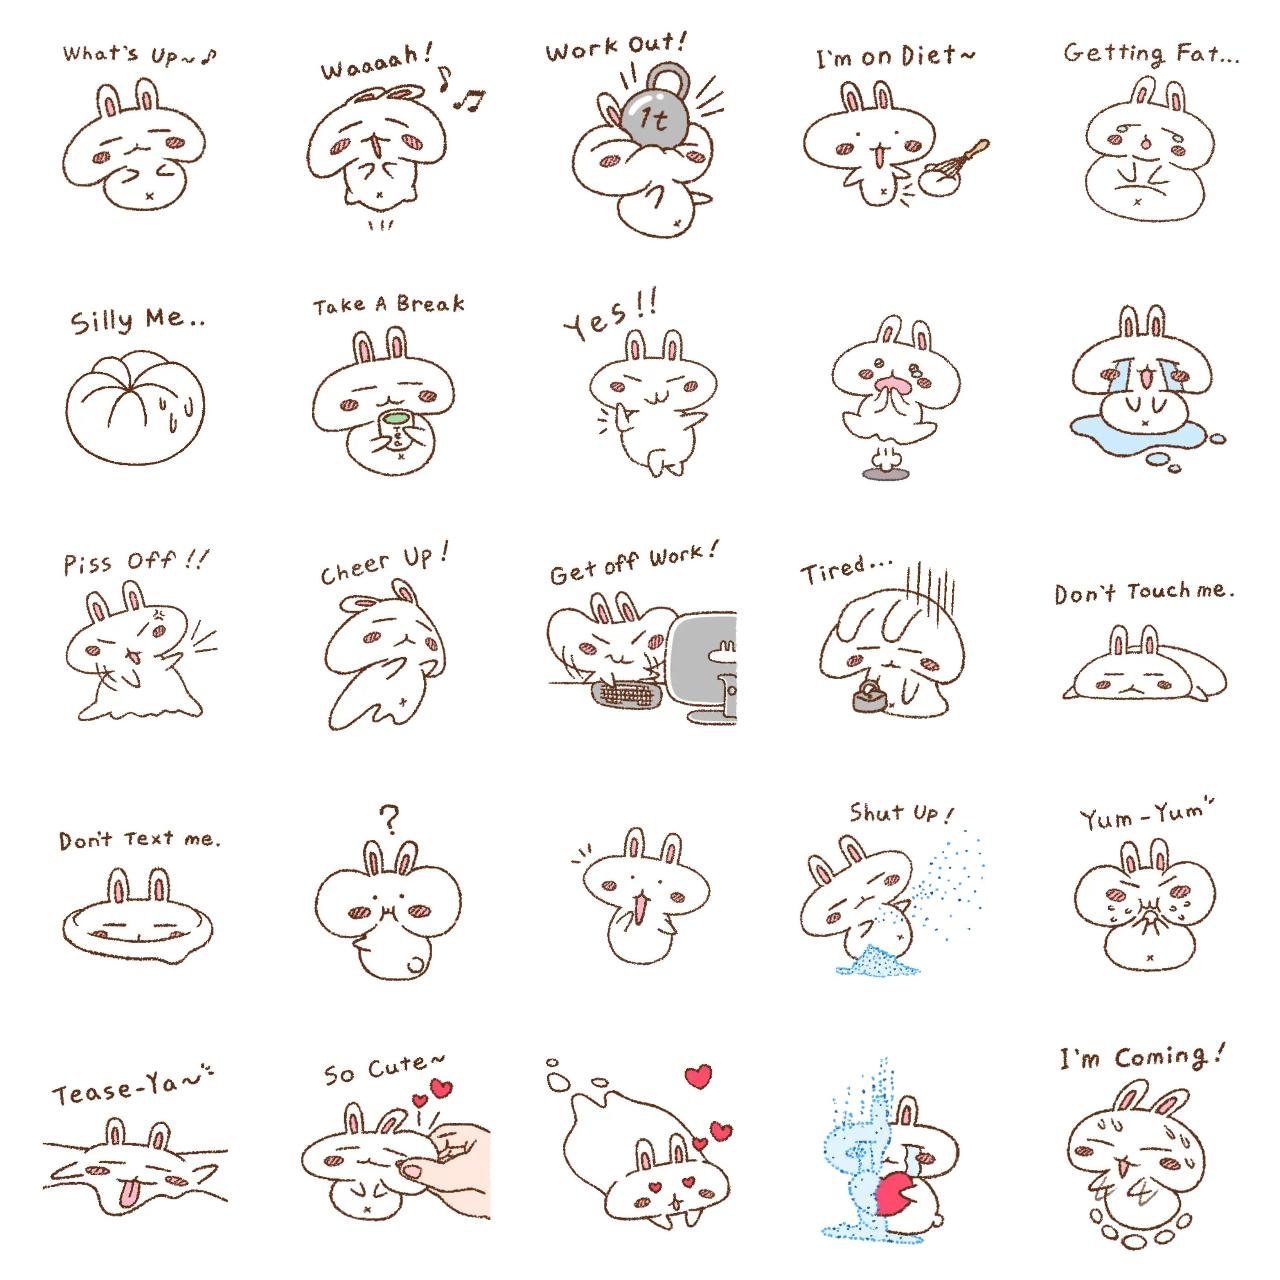 Chubby dough flour + Rabbit = Cheekbbit Animation/Cartoon,Food/Drink sticker pack for Whatsapp, Telegram, Signal, and others chatting and message apps